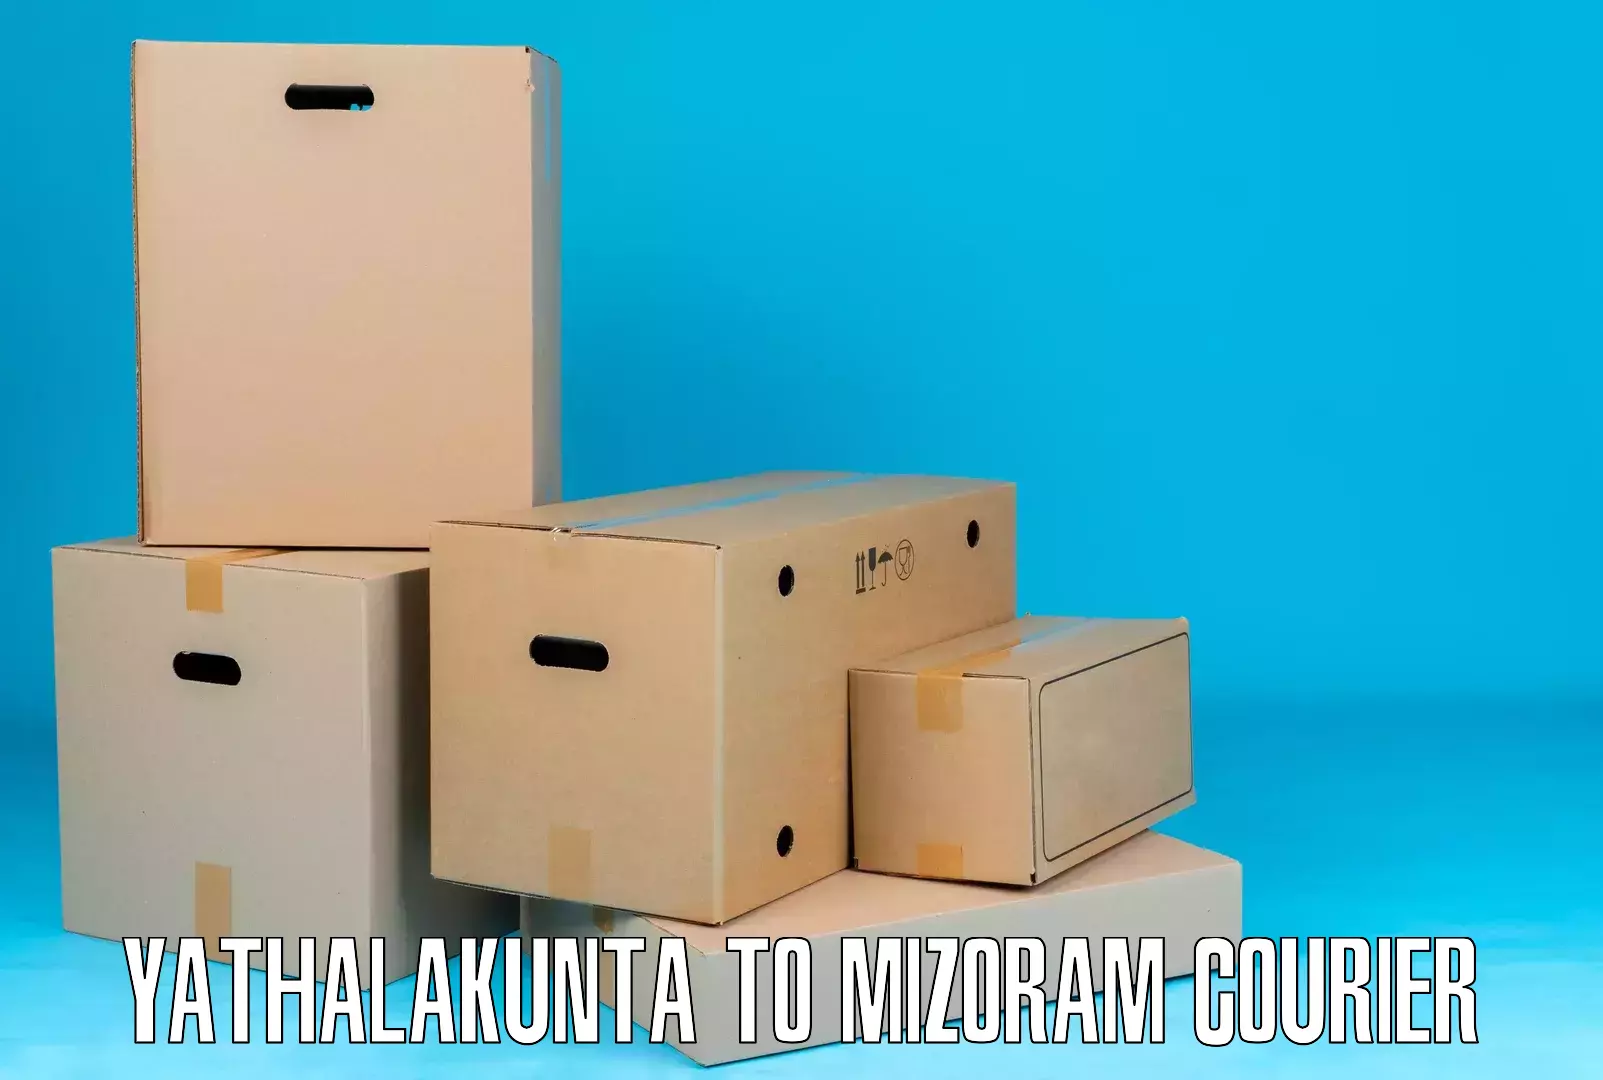 Global parcel delivery Yathalakunta to Aizawl